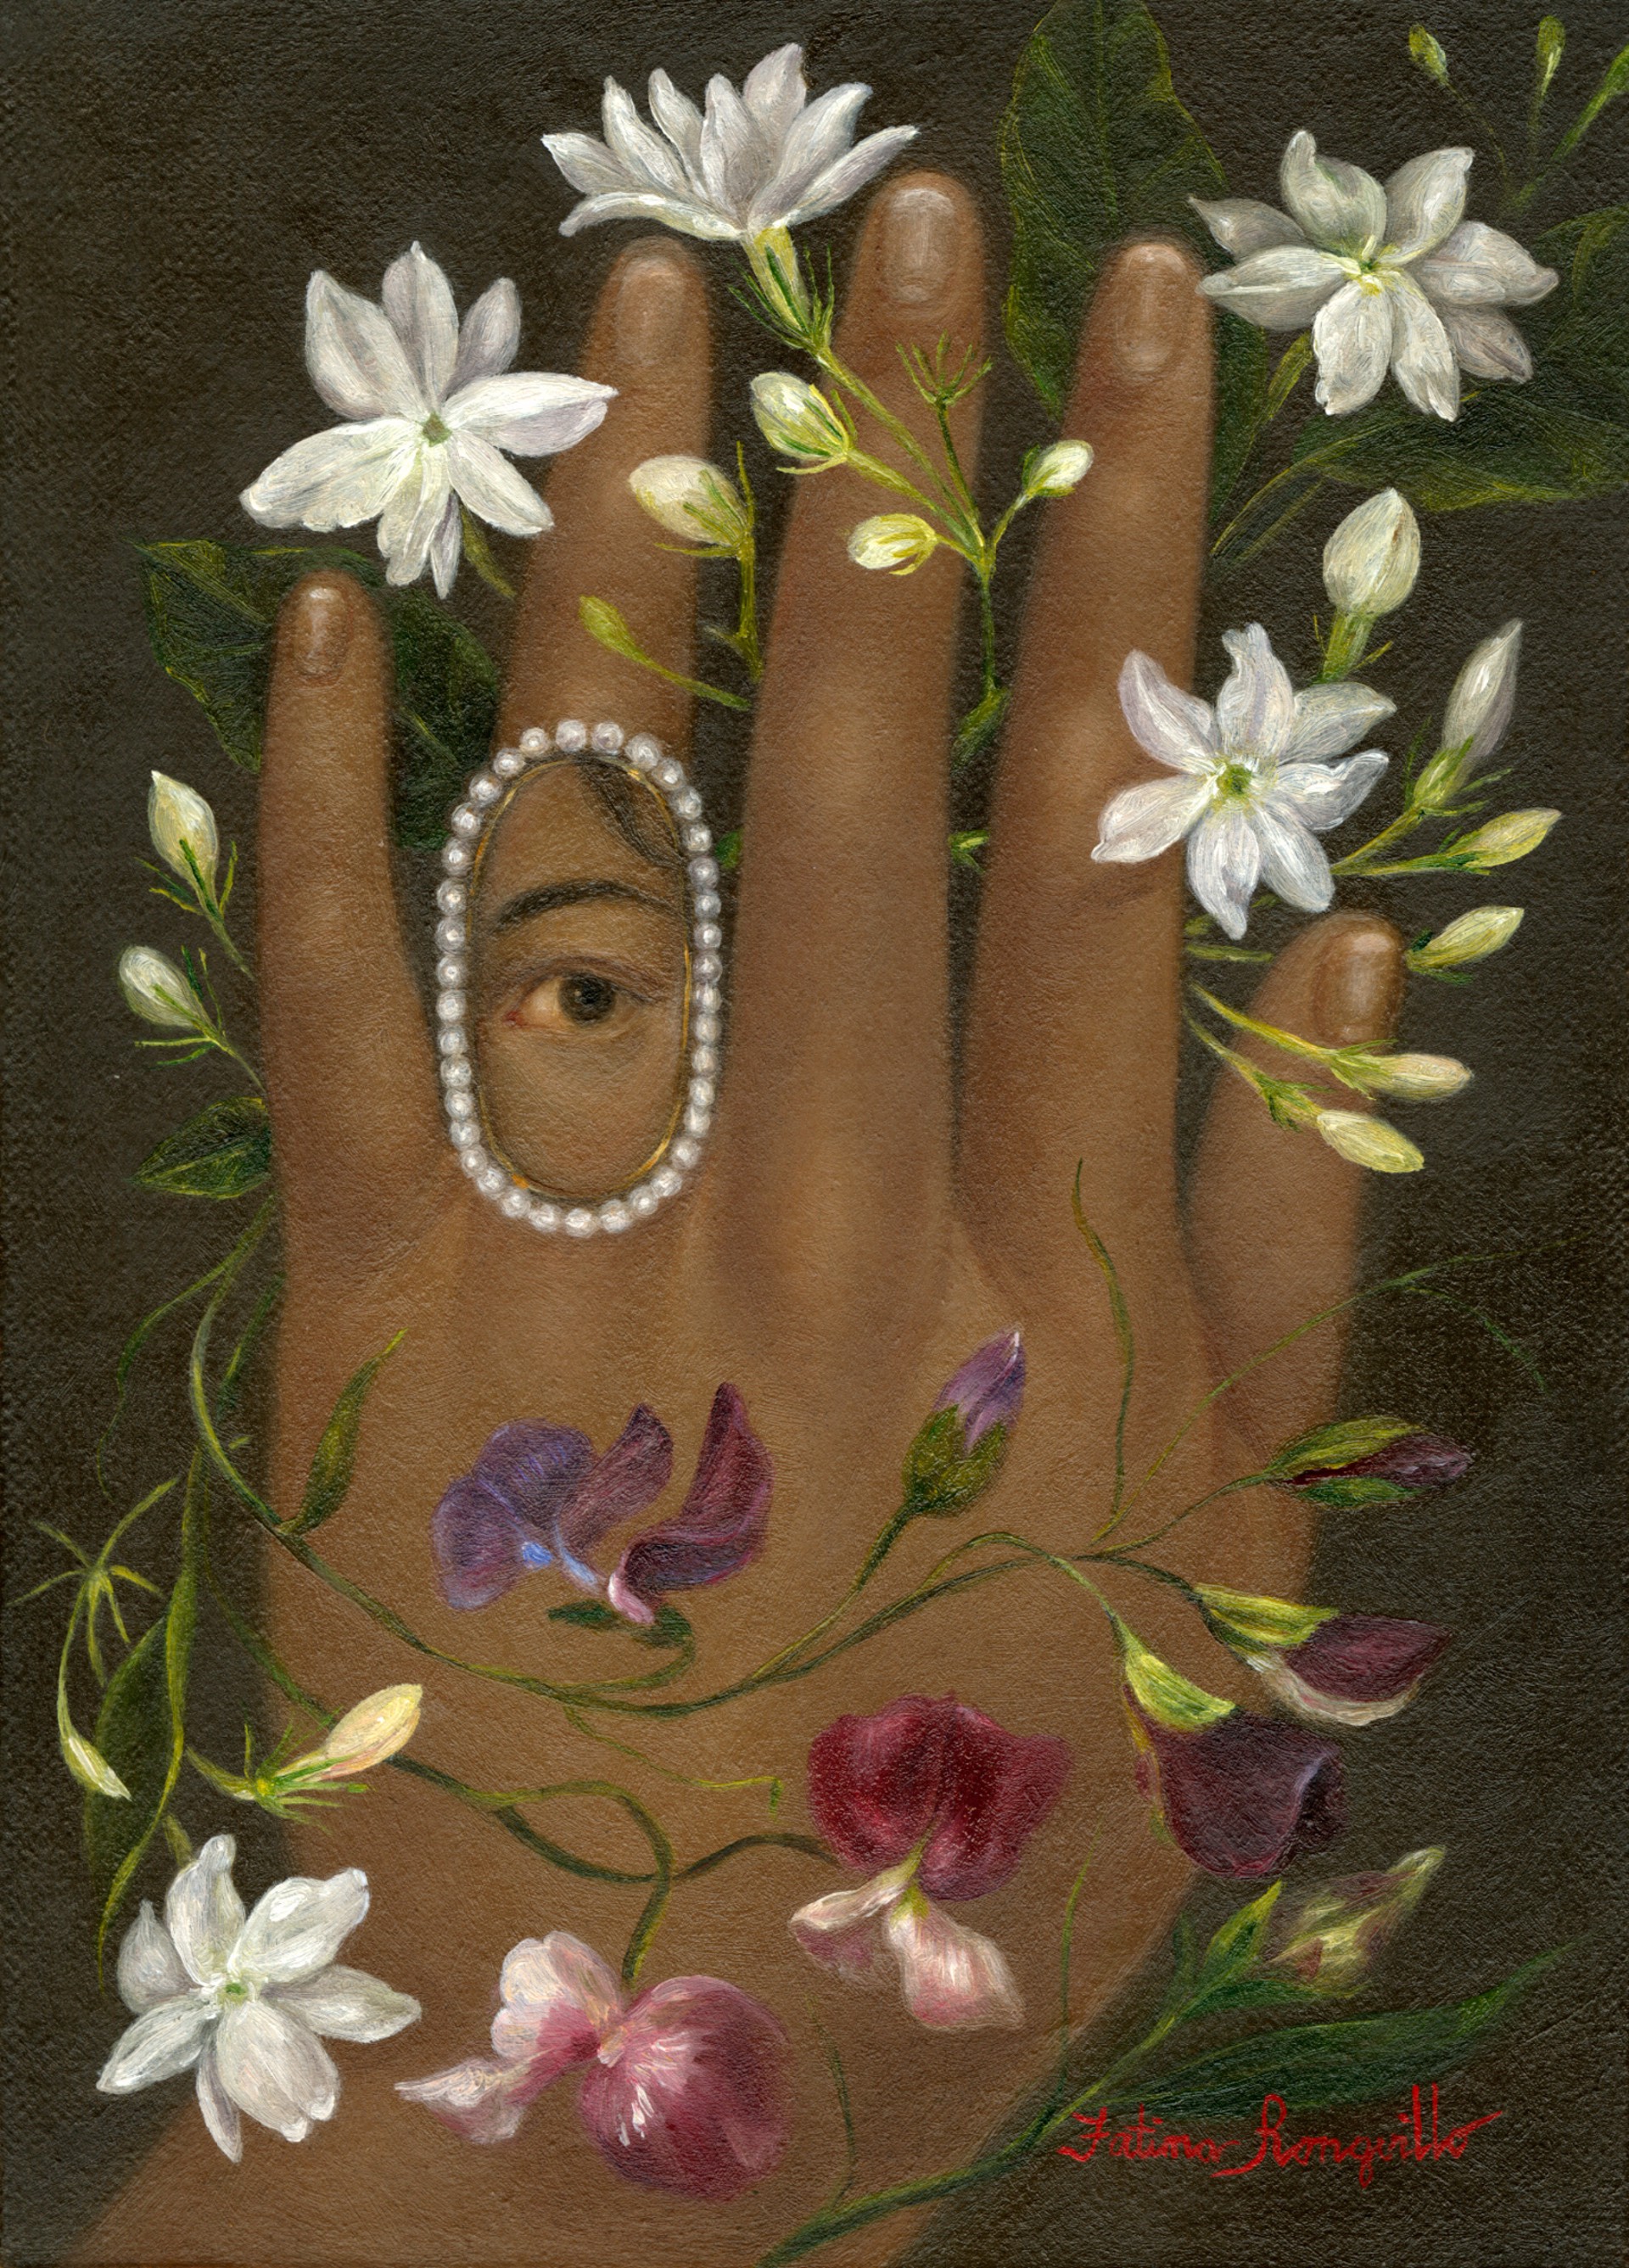 The Artist's Eye and Hand with Jasmines and Sweet Peas by Fatima Ronquillo